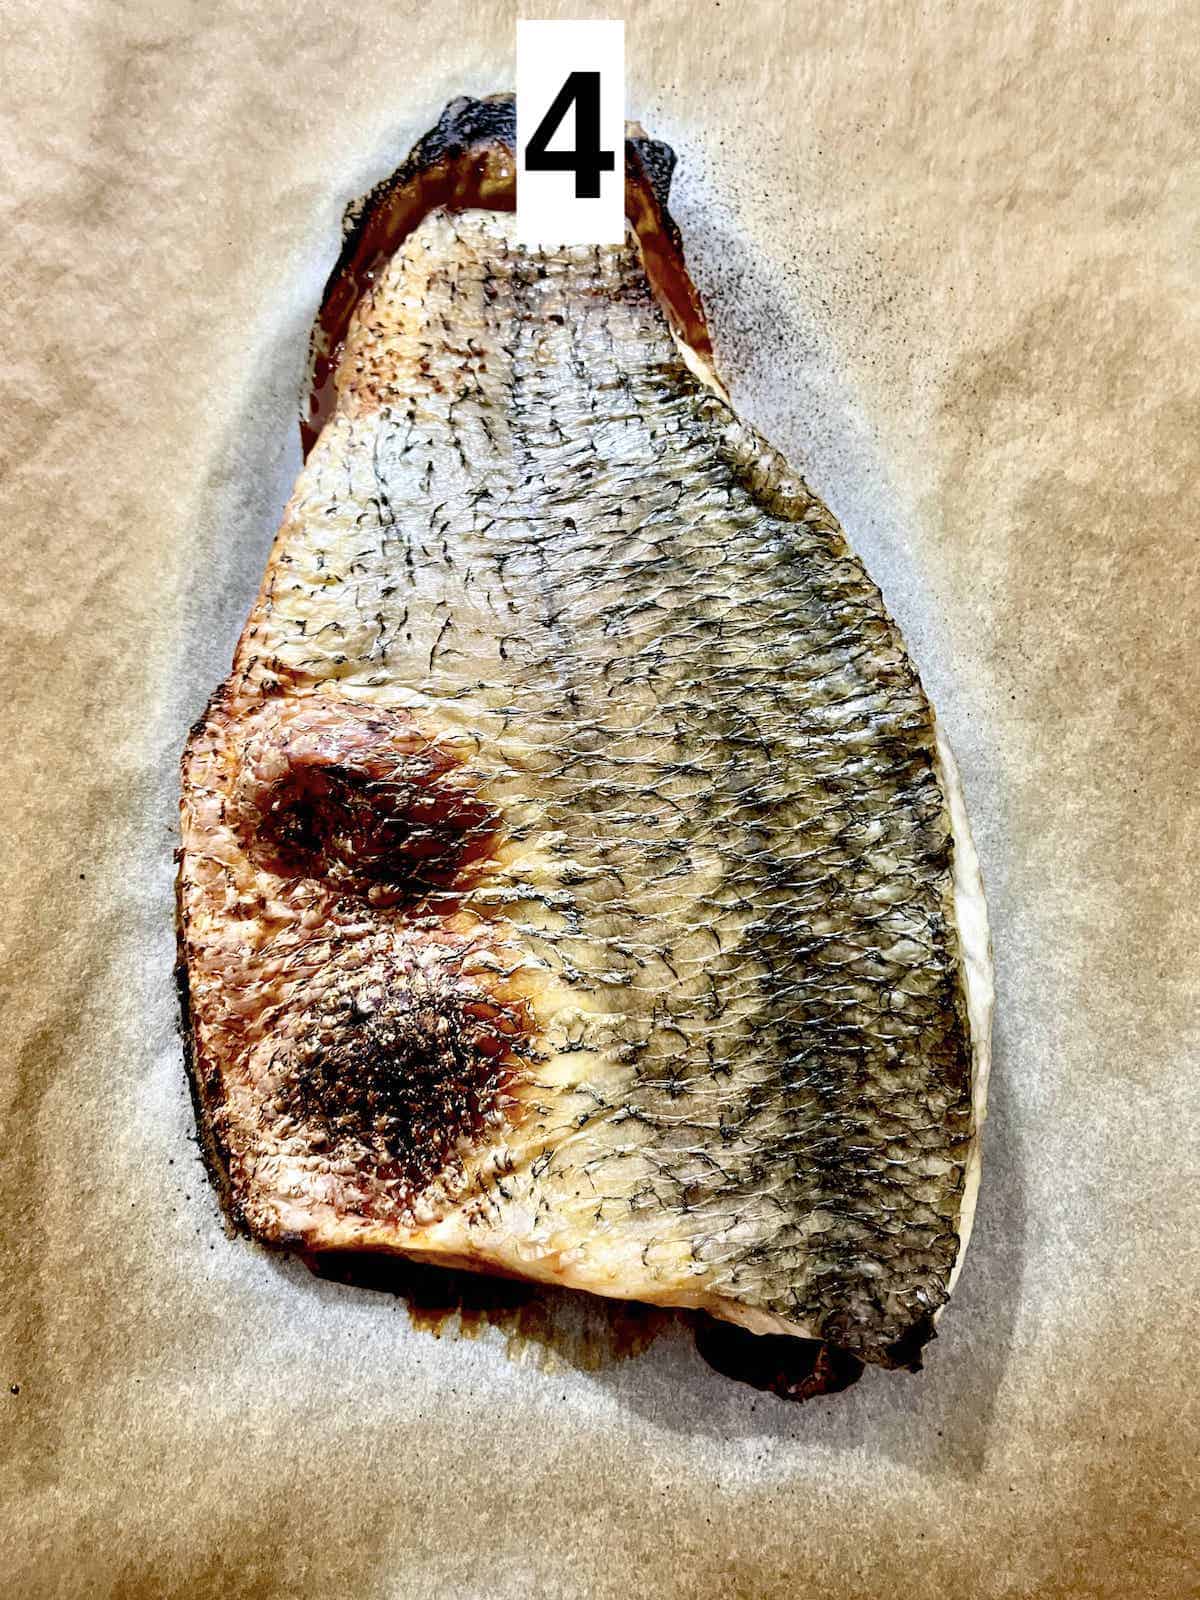 Broiled sea bass with nice blistered skin.